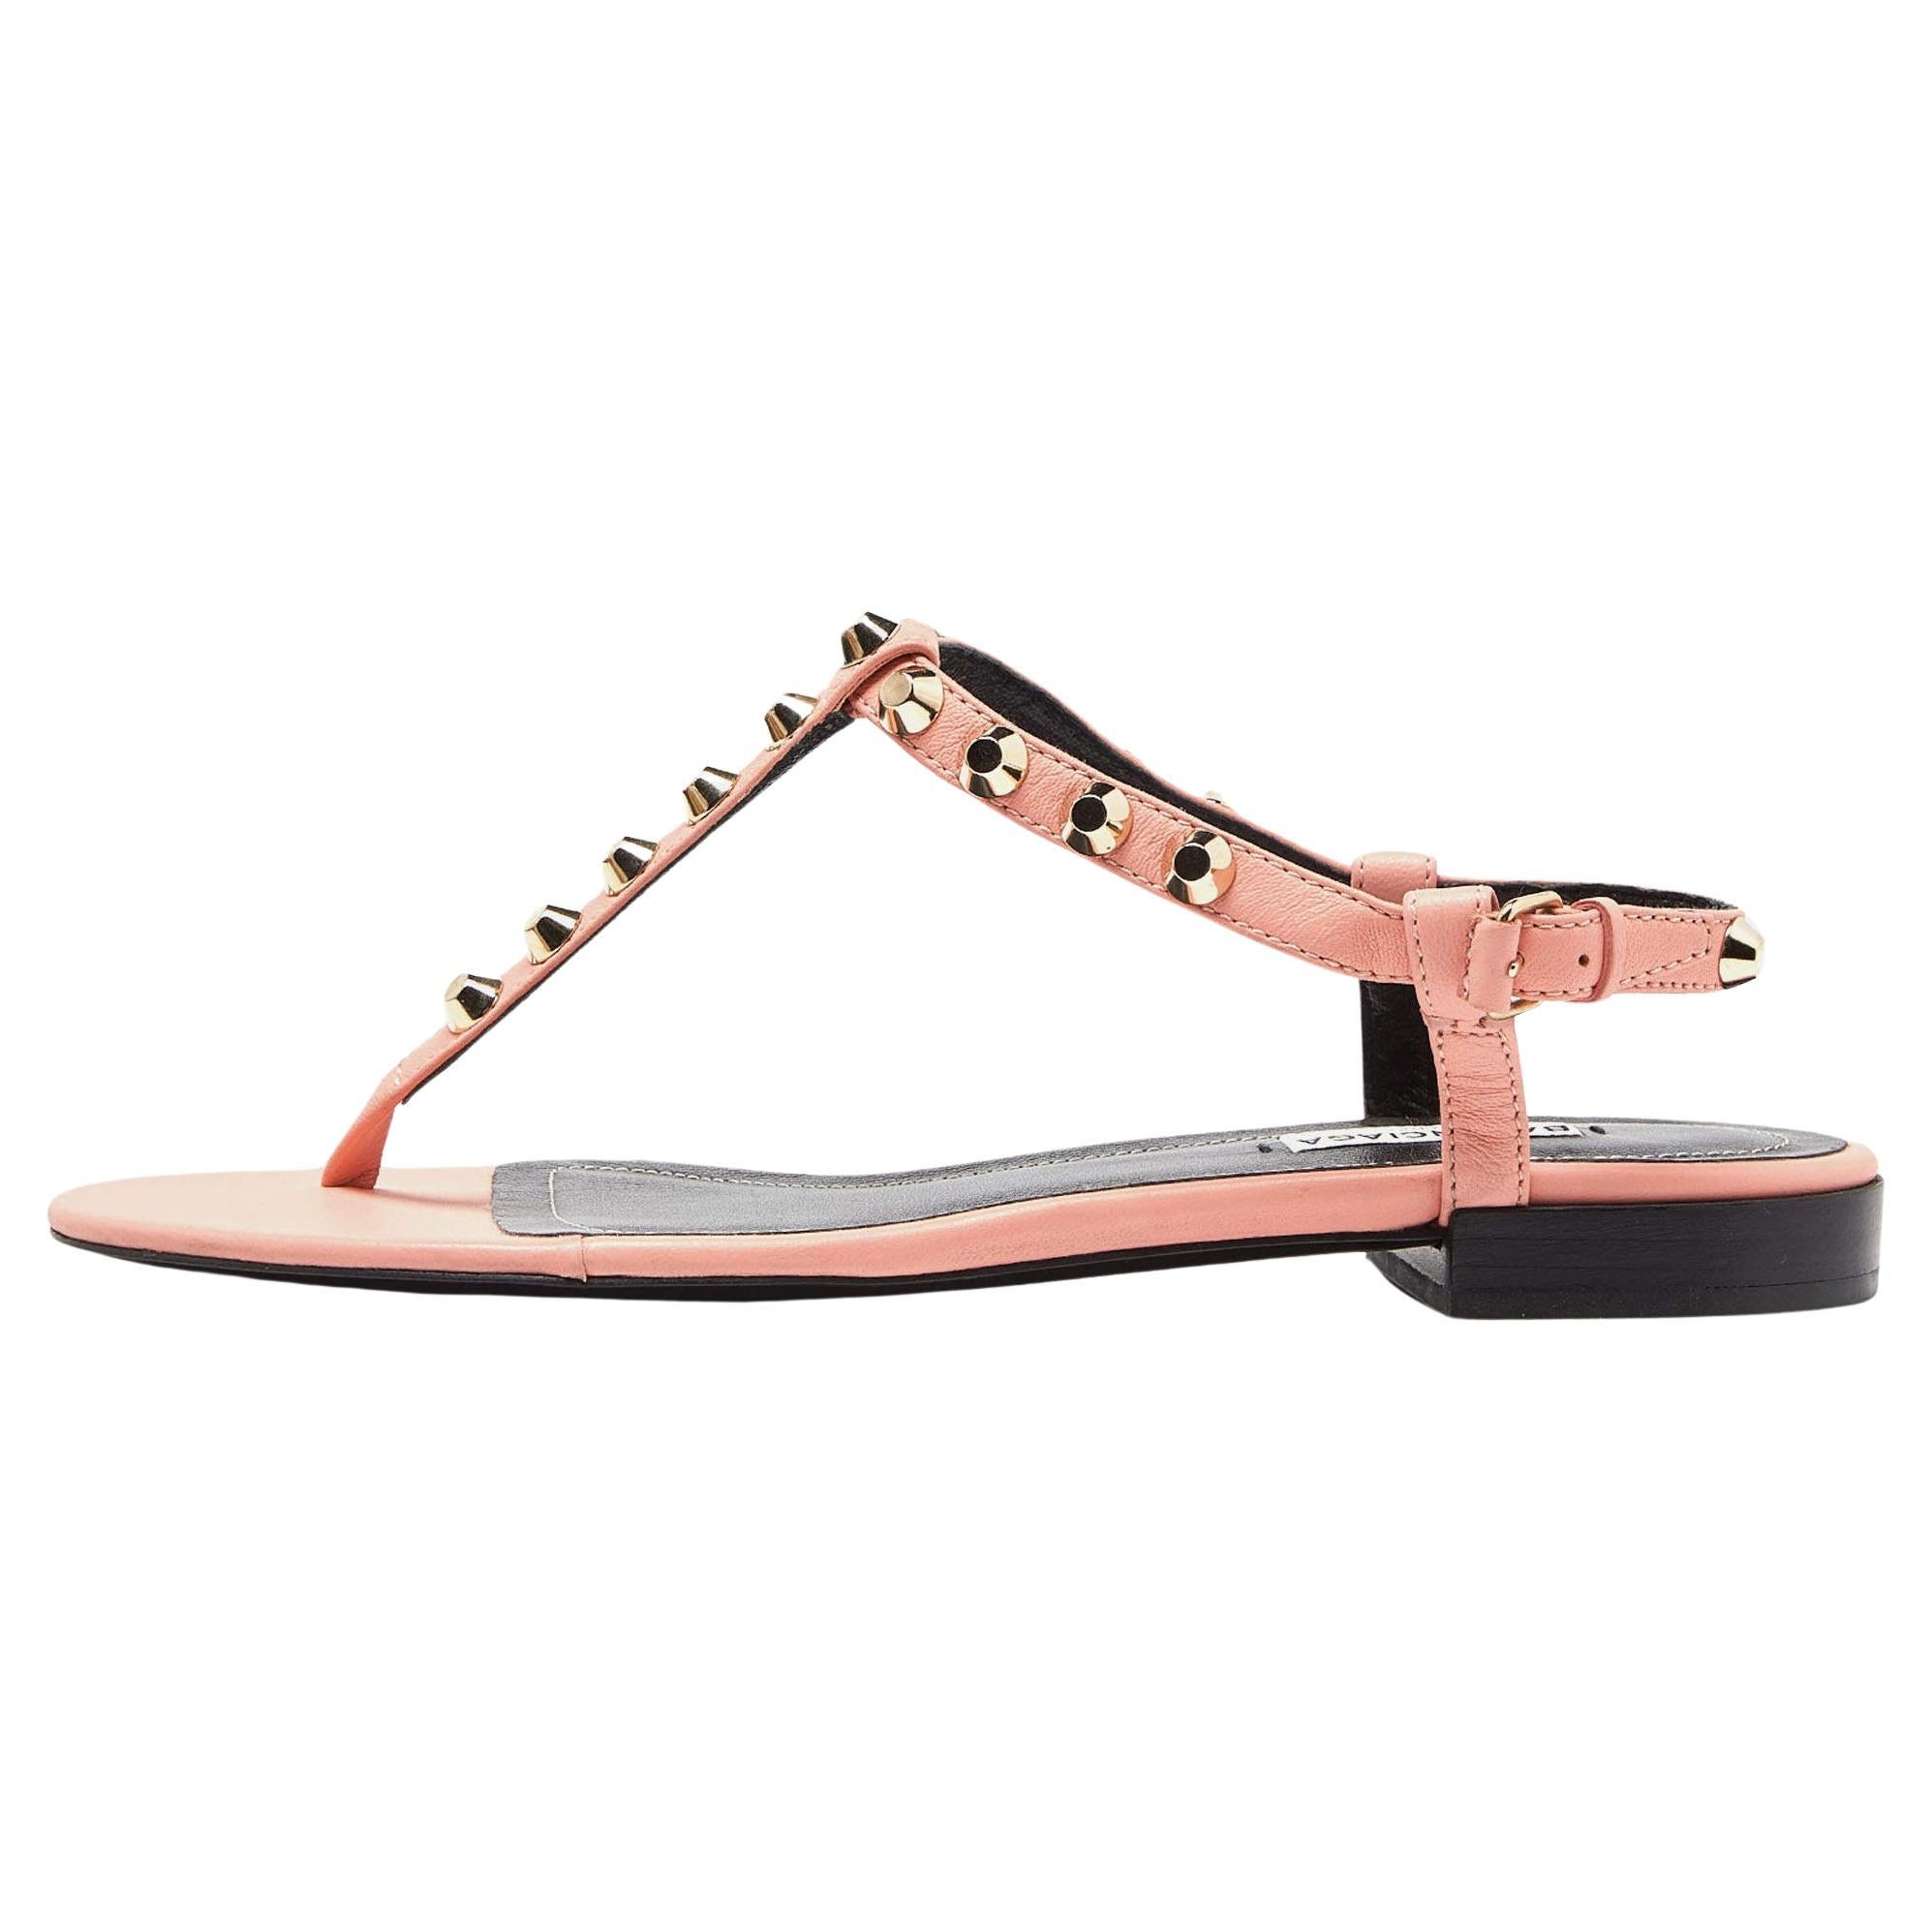 Balenciaga Peach/Black Leather Arena Thong Sandals Size 38 For Sale